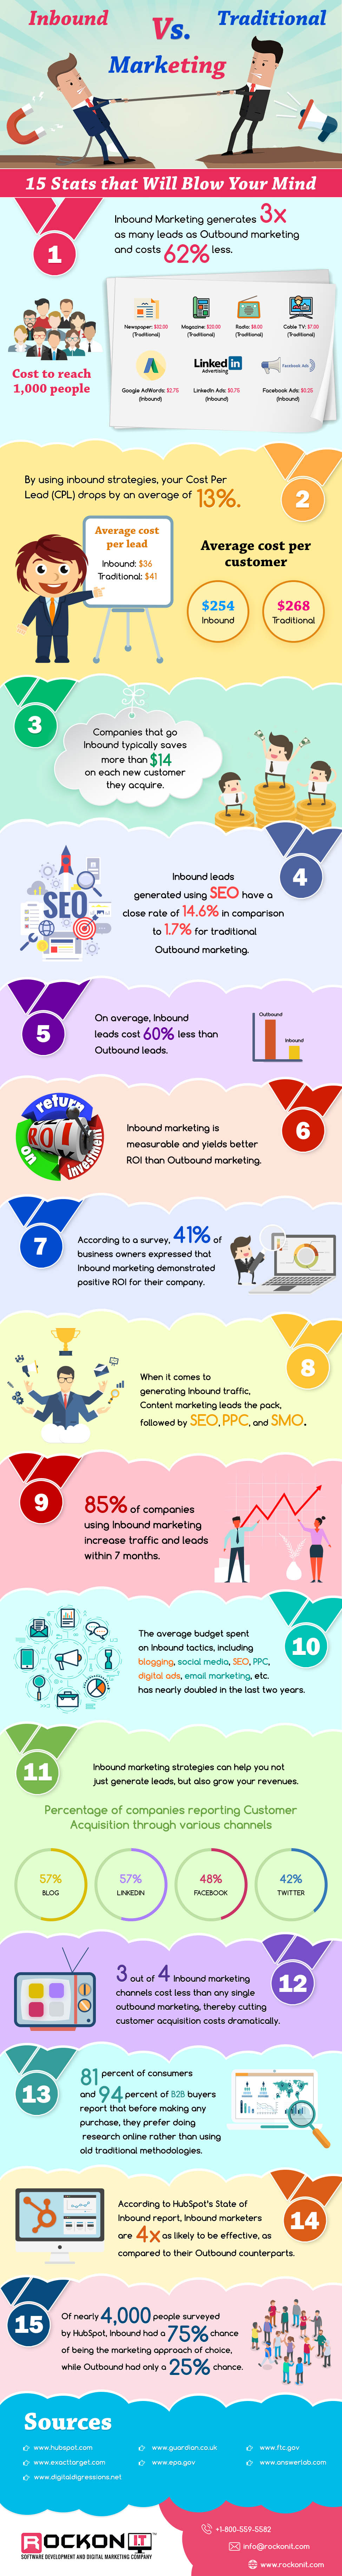 Inbound Marketing is More Efficacious than Traditional Methods 